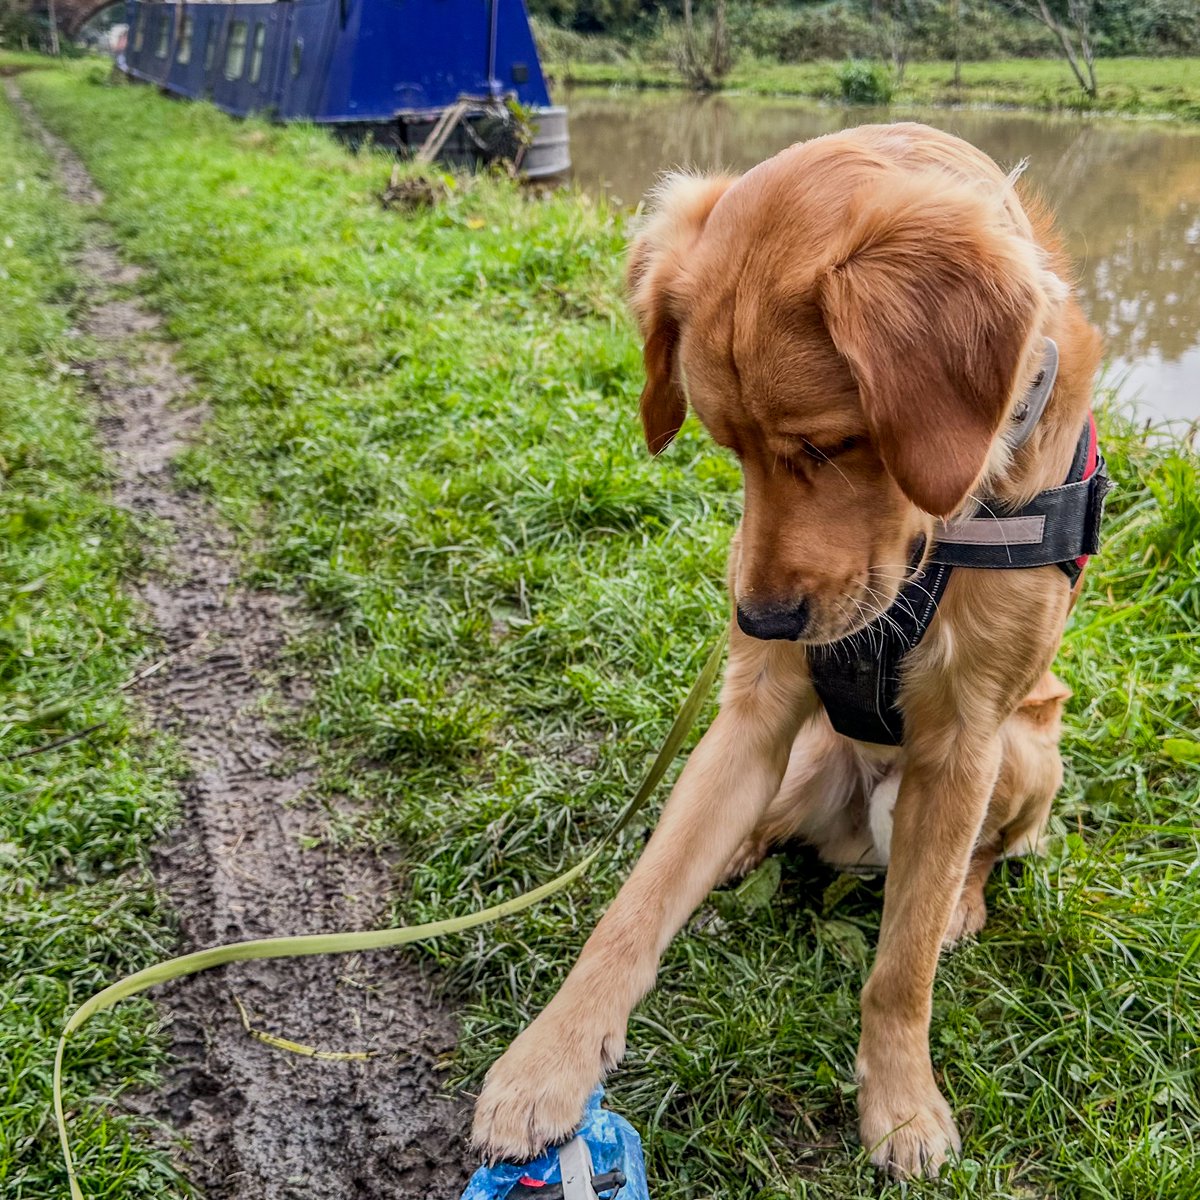 #RedMoonshine has been out on the #CoventryCanal towpath this lunchtime helping with #BigPlasticPickUp to #KeepCanalsAlive where #NbWillTry is moored. #PlasticsChallenge #BoatsThatTweet #LifesBetterByWater #LitterPicking #Grendon #BartleyGreen @CanalRiverTrust  @CRTWestMidlands